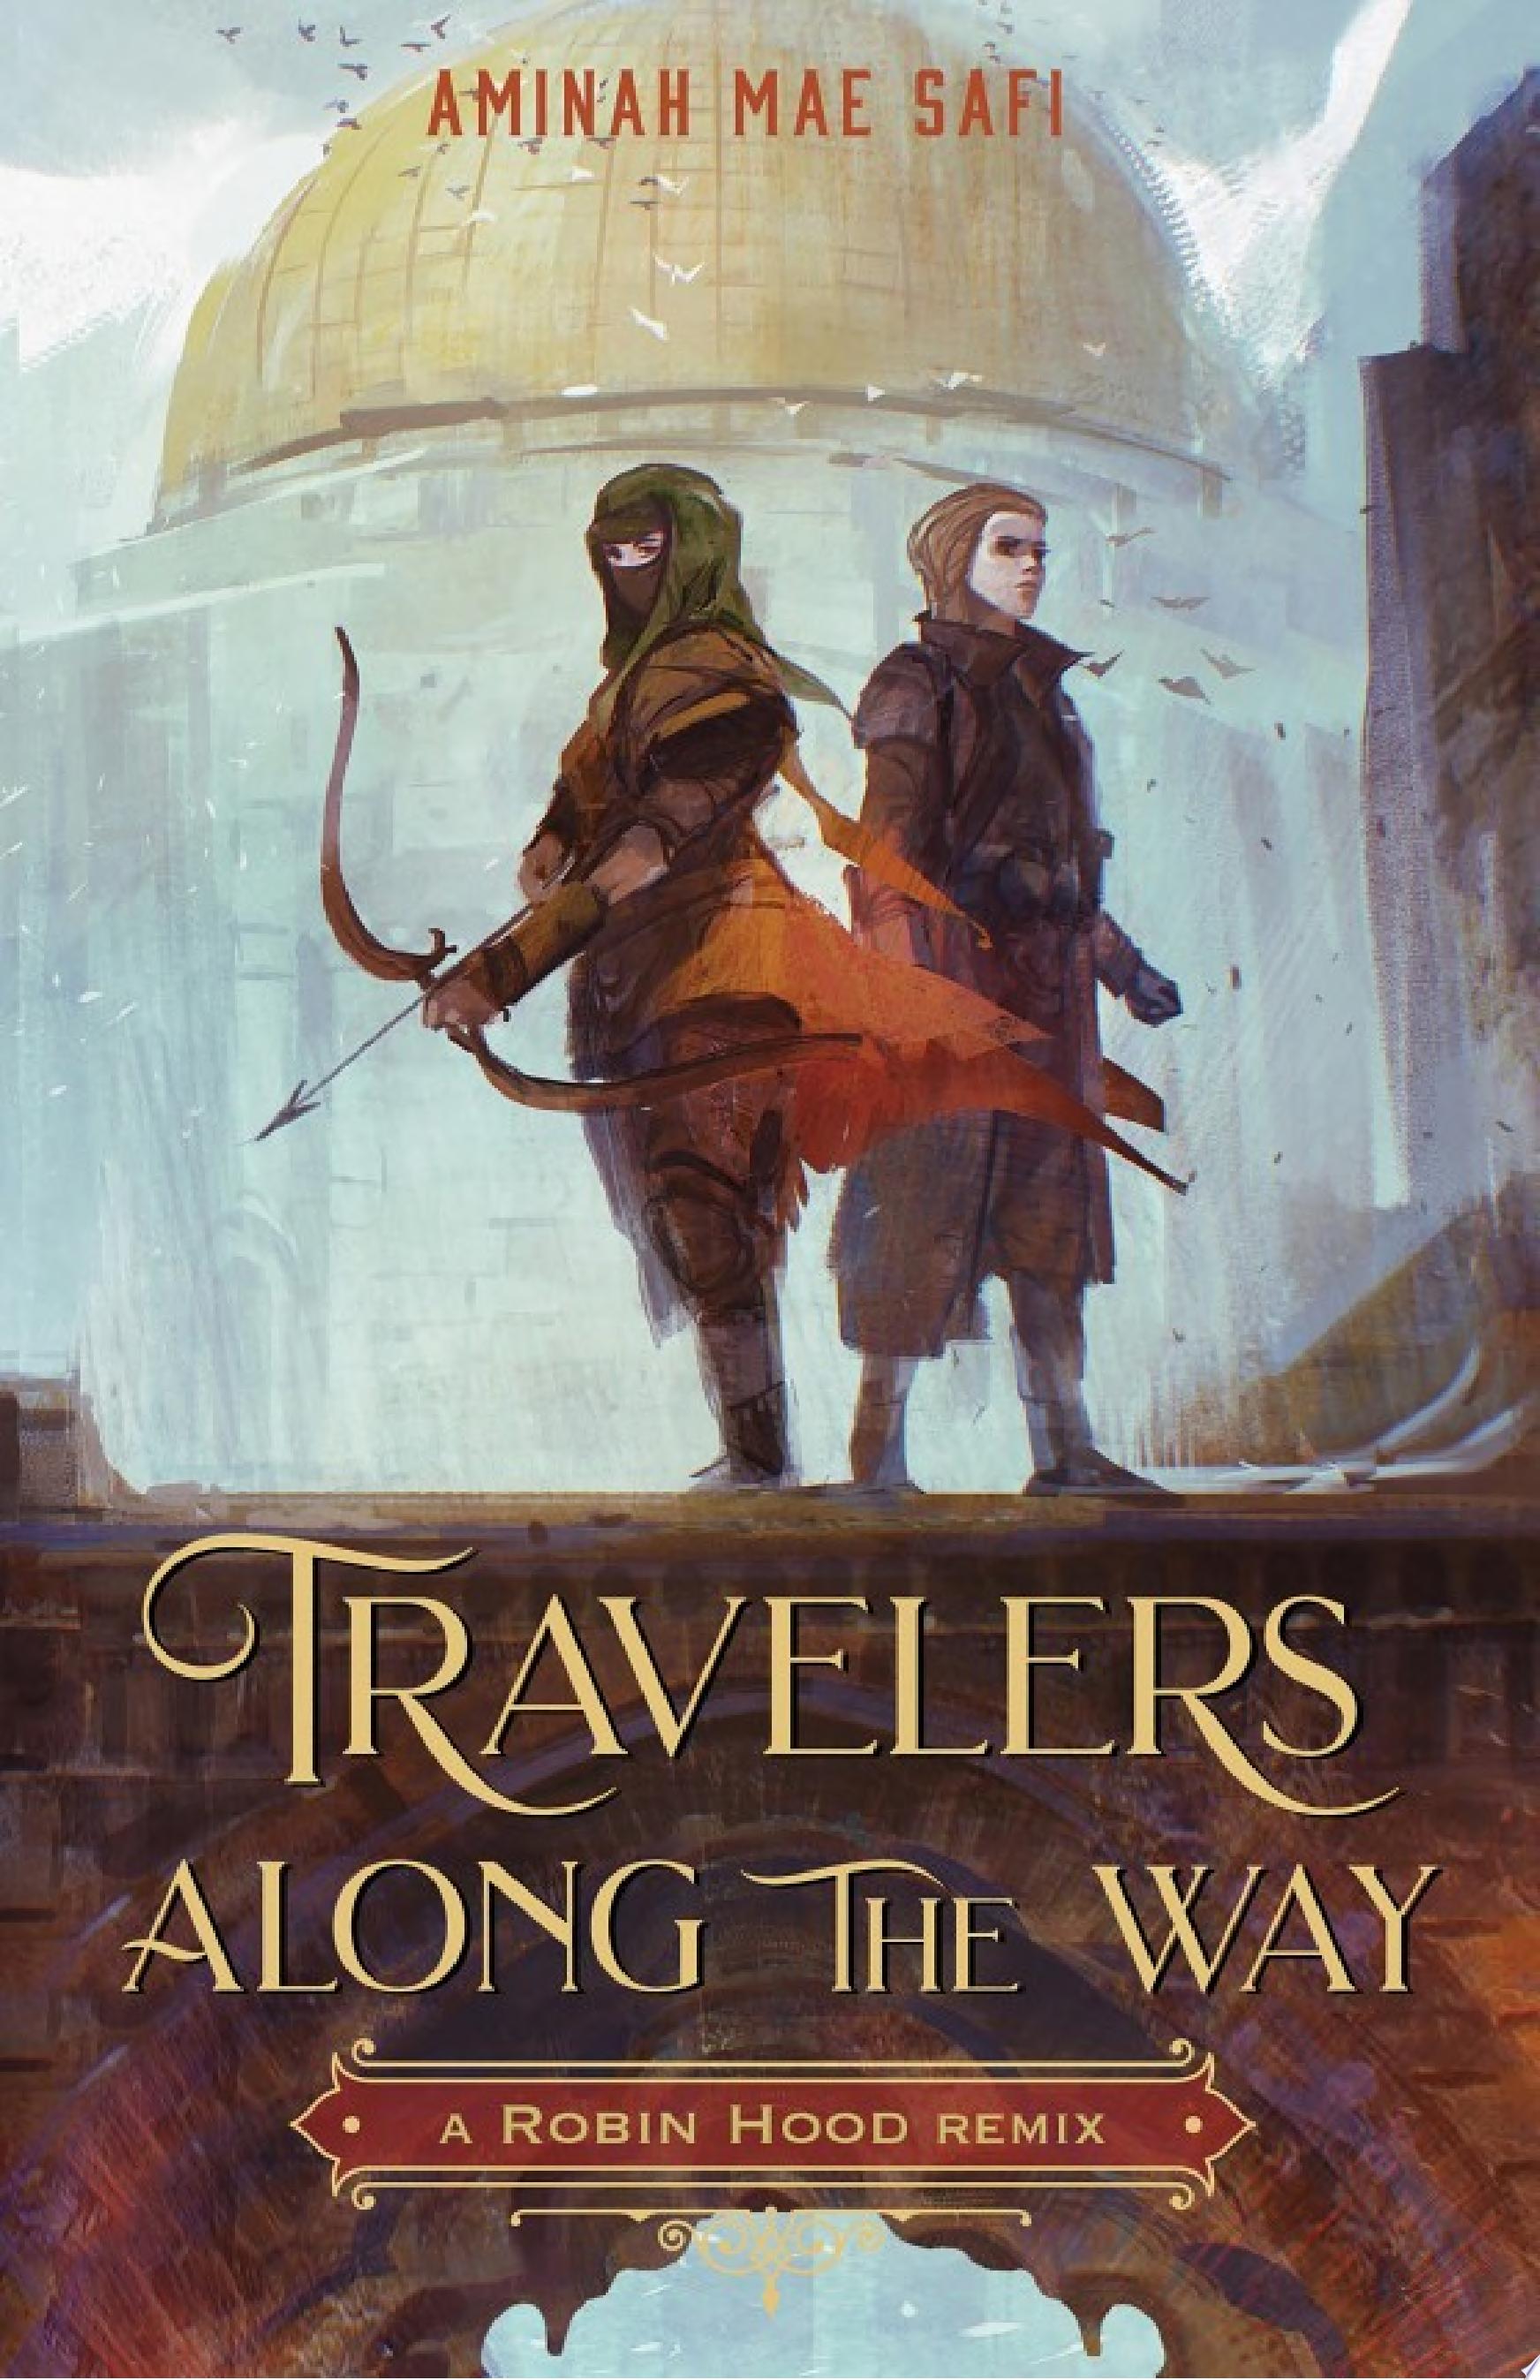 Image for "Travelers Along the Way: A Robin Hood Remix"